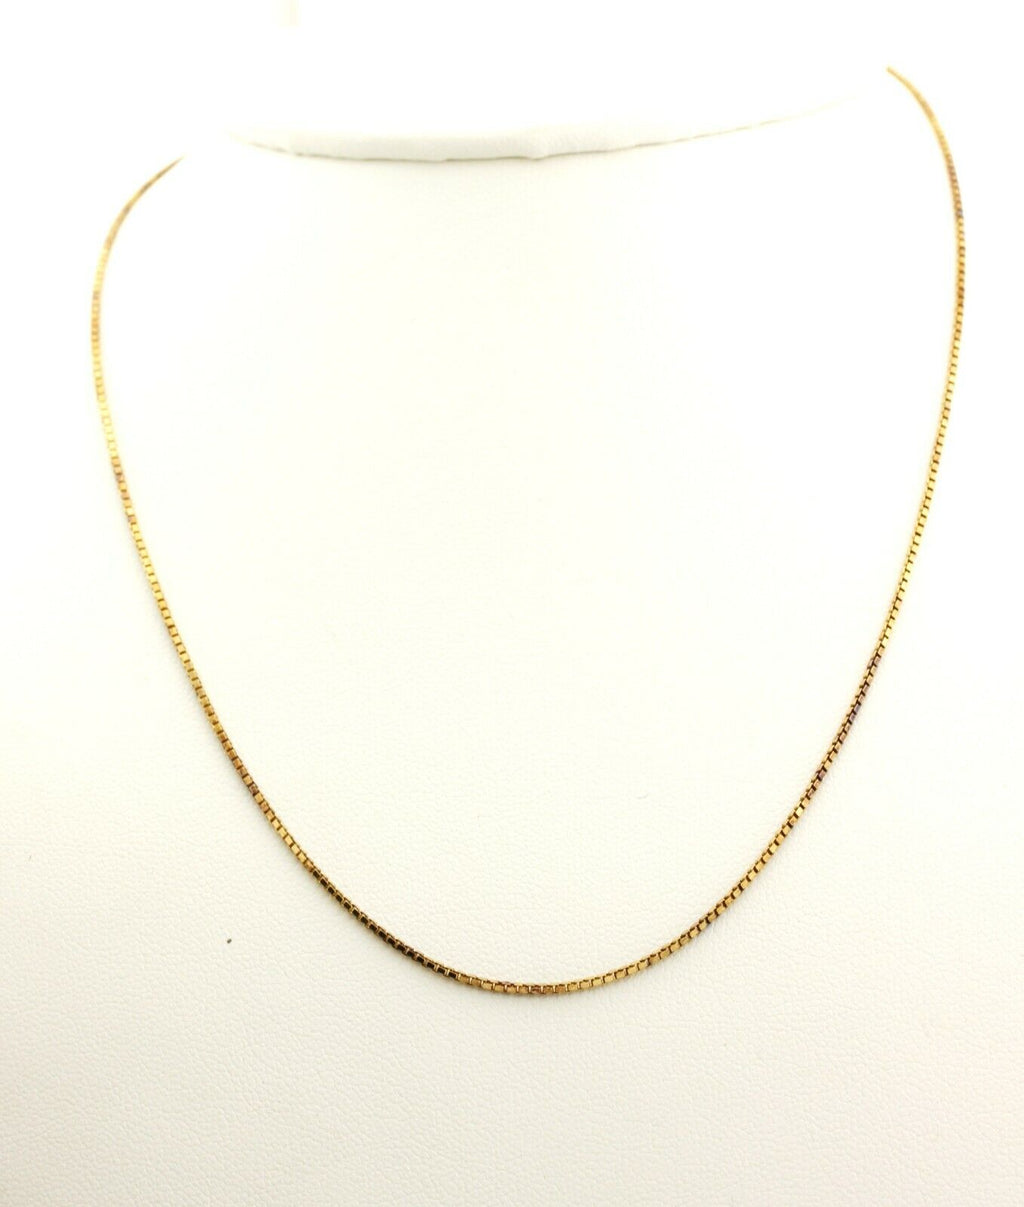 925 vermeil sterling silver box chain necklace Italy 16 inch 1mm 2.2g estate